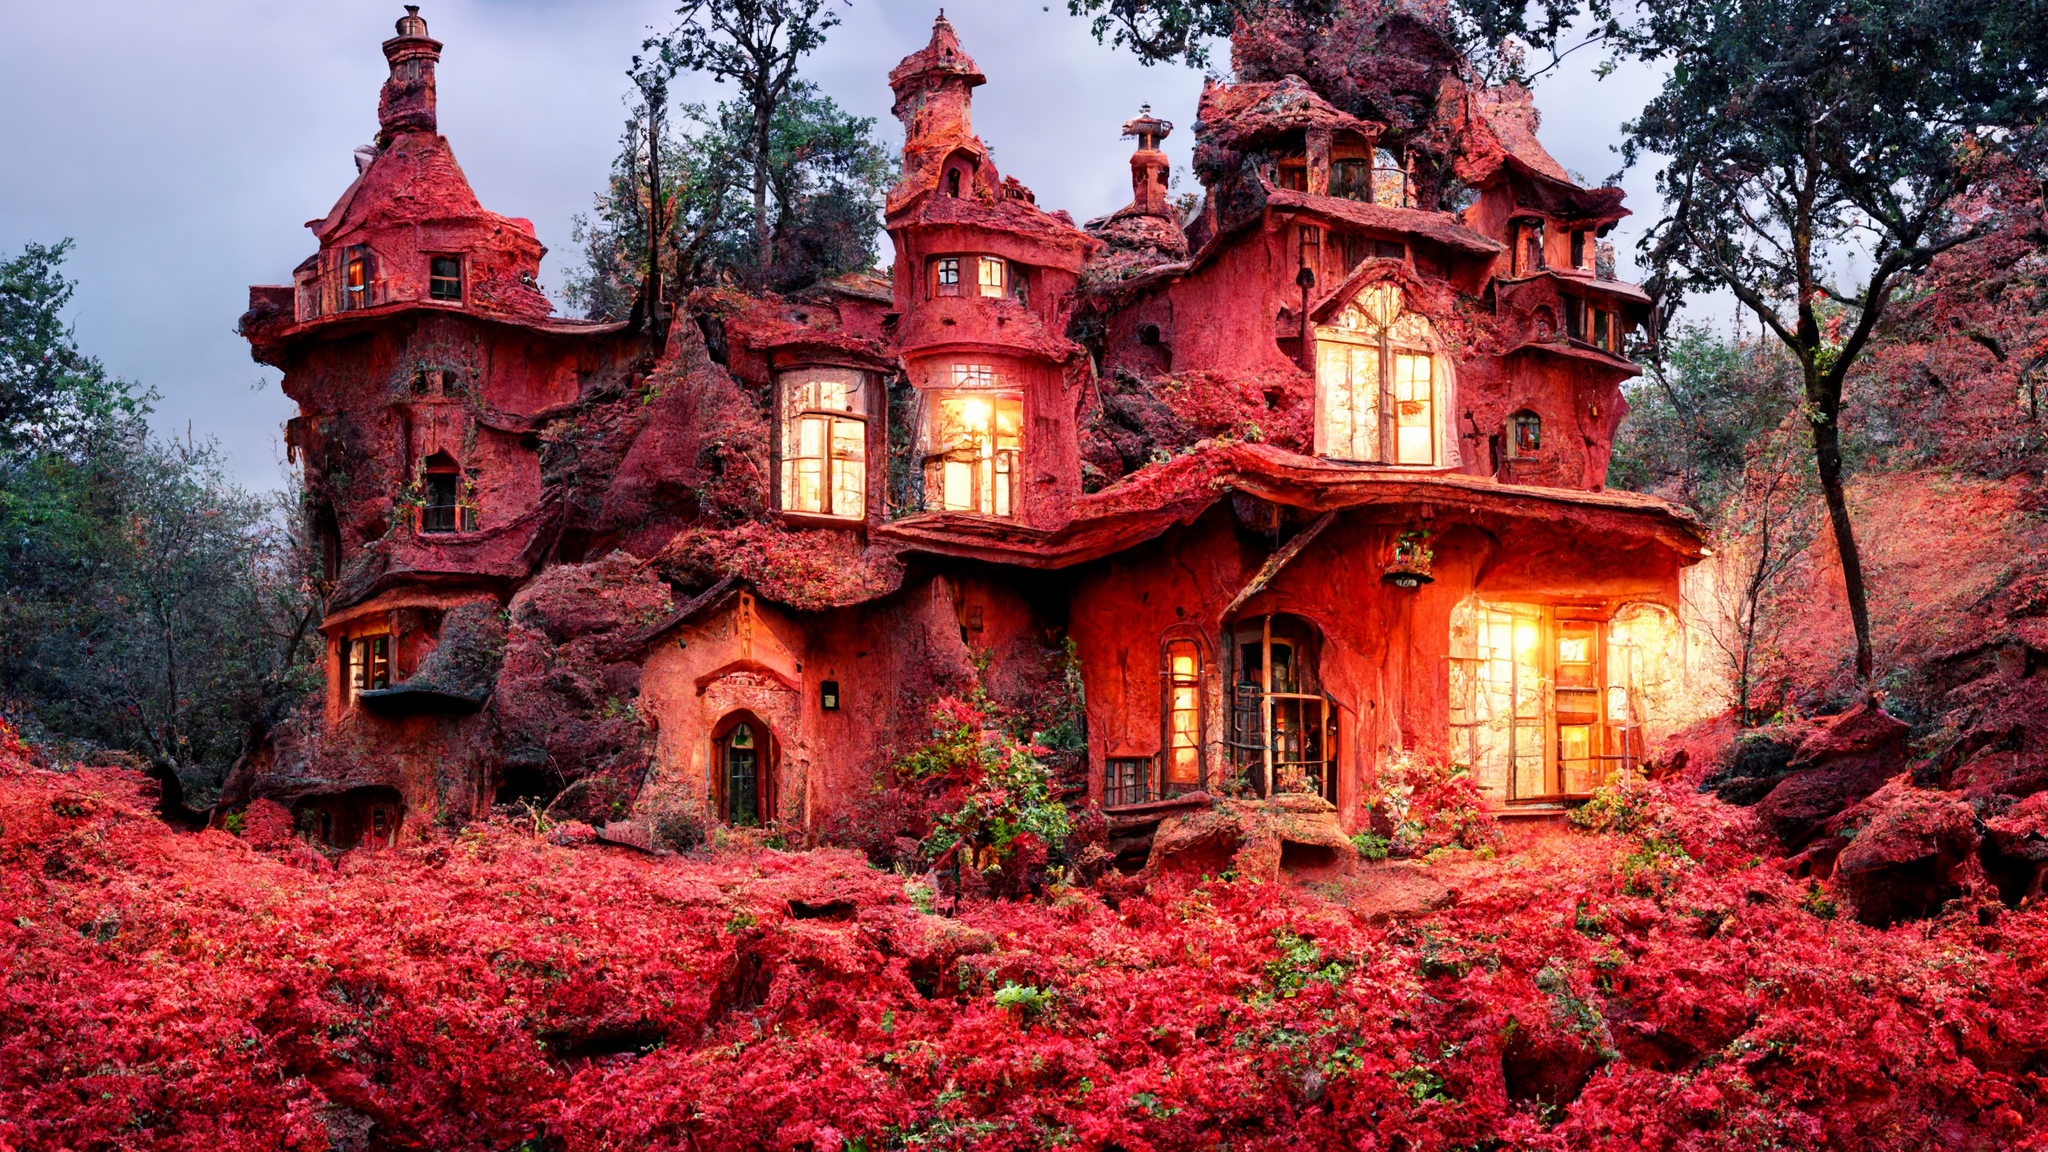 General 2048x1152 fantasy architecture red house mansions fairy tale hills nature roof garden AI art